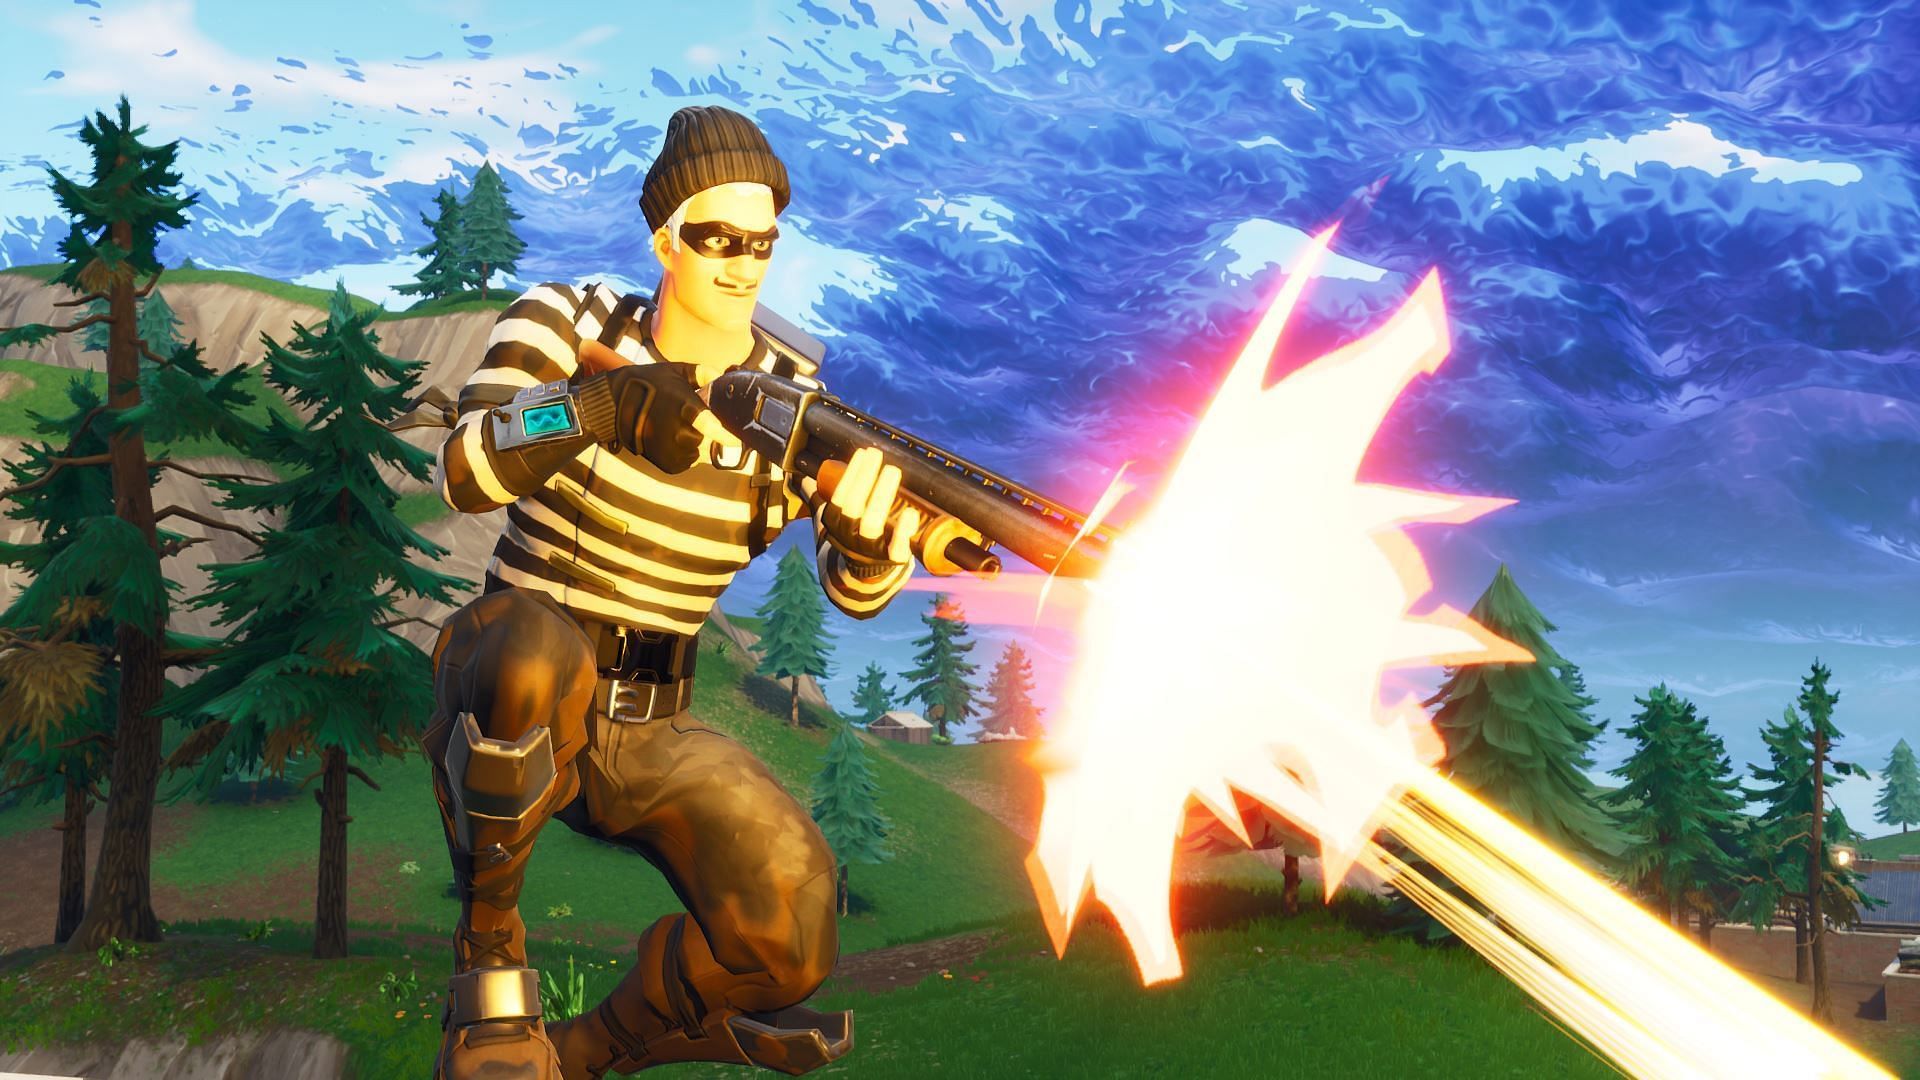 Fortnite players have to deal damage to opponents while airborne for the latest challenge (Image via Epic Games)